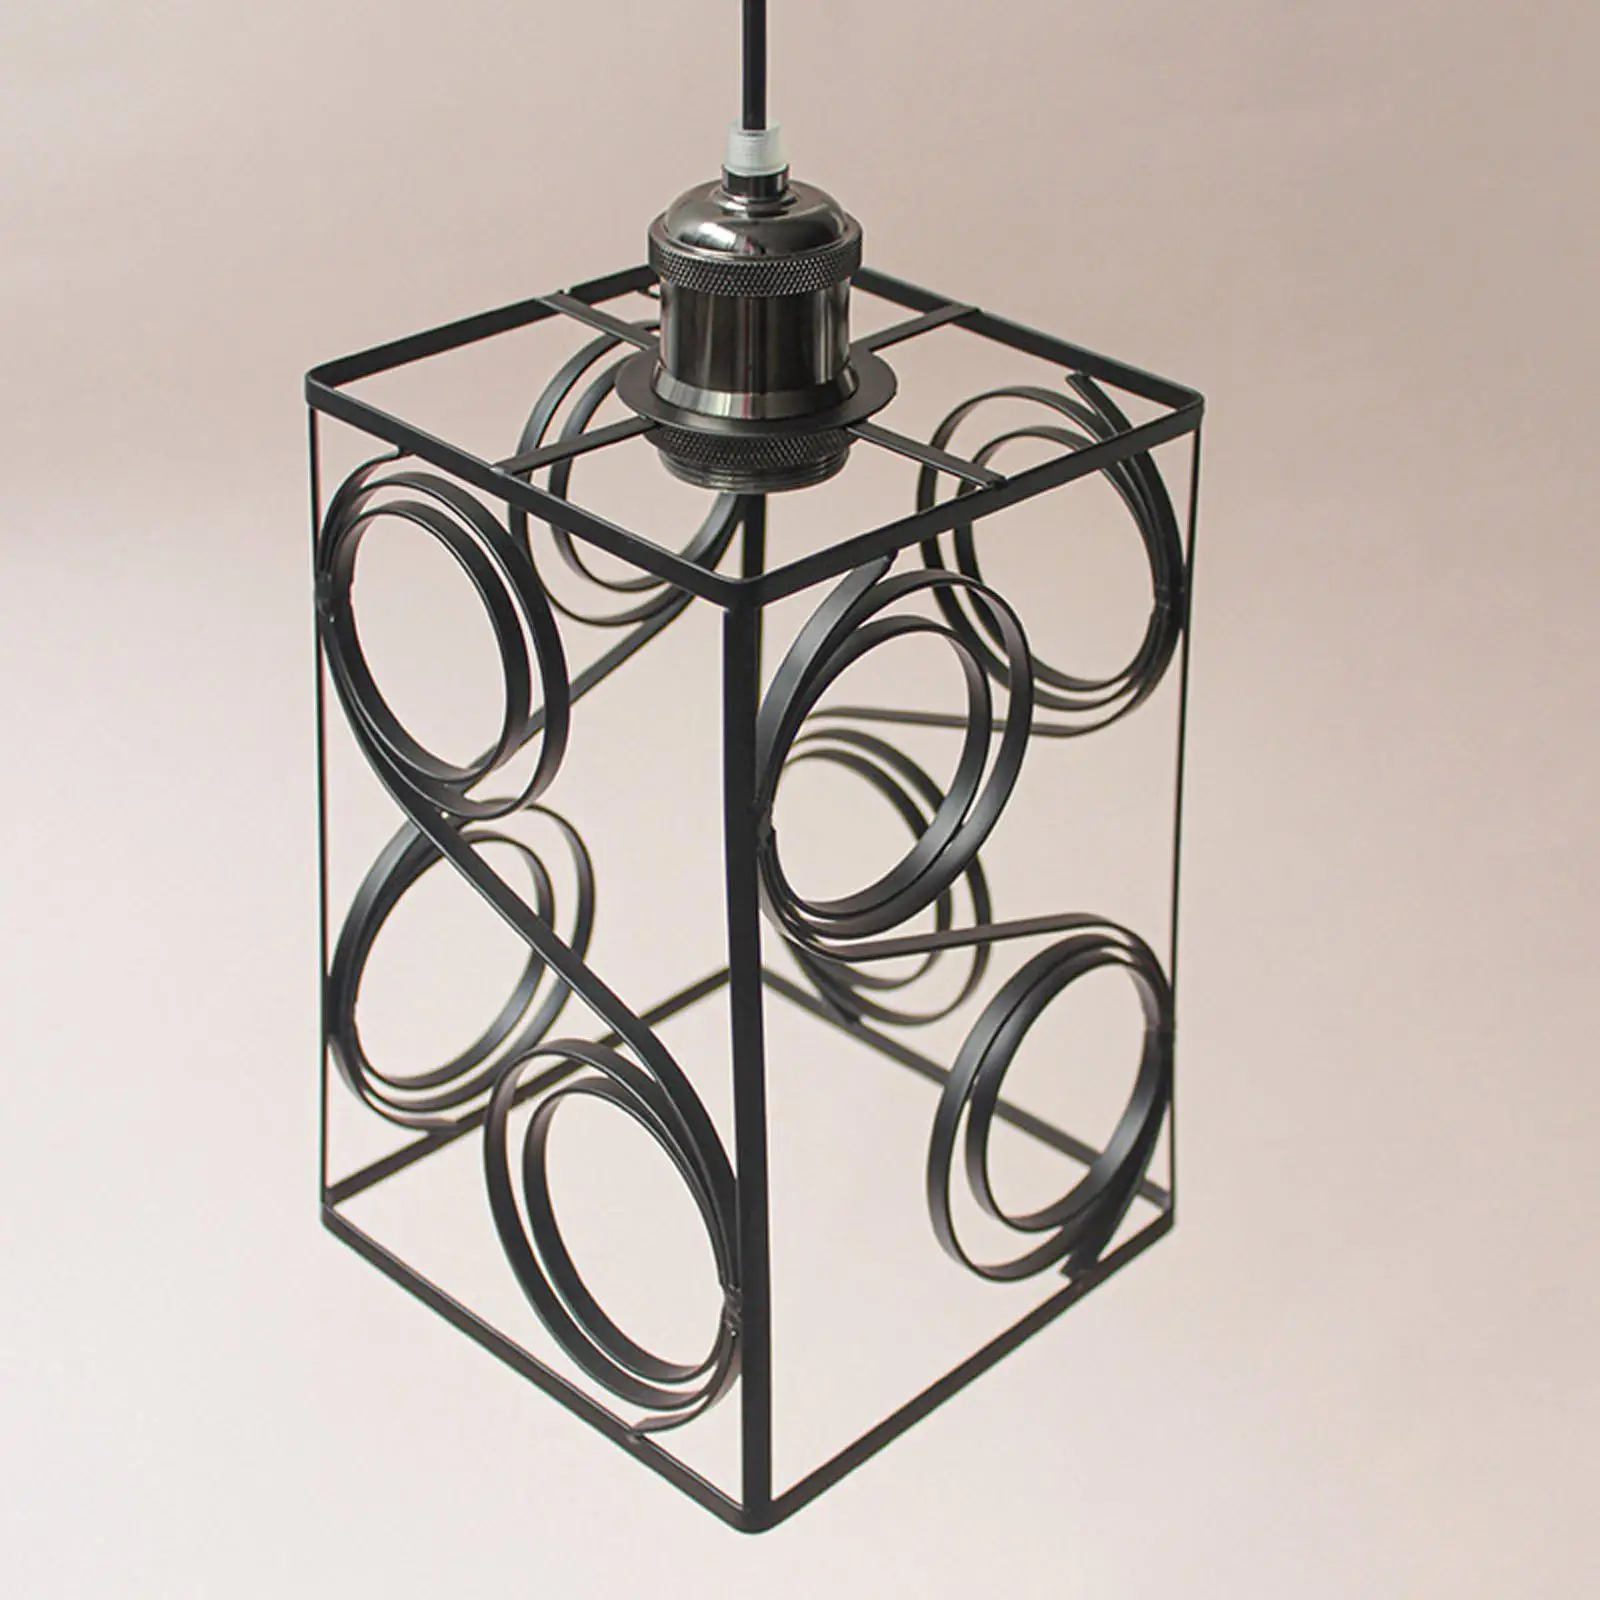 Pendant Lamps Lantern Shade Rustic Cage Lamp Shade for Hotel Dining Room